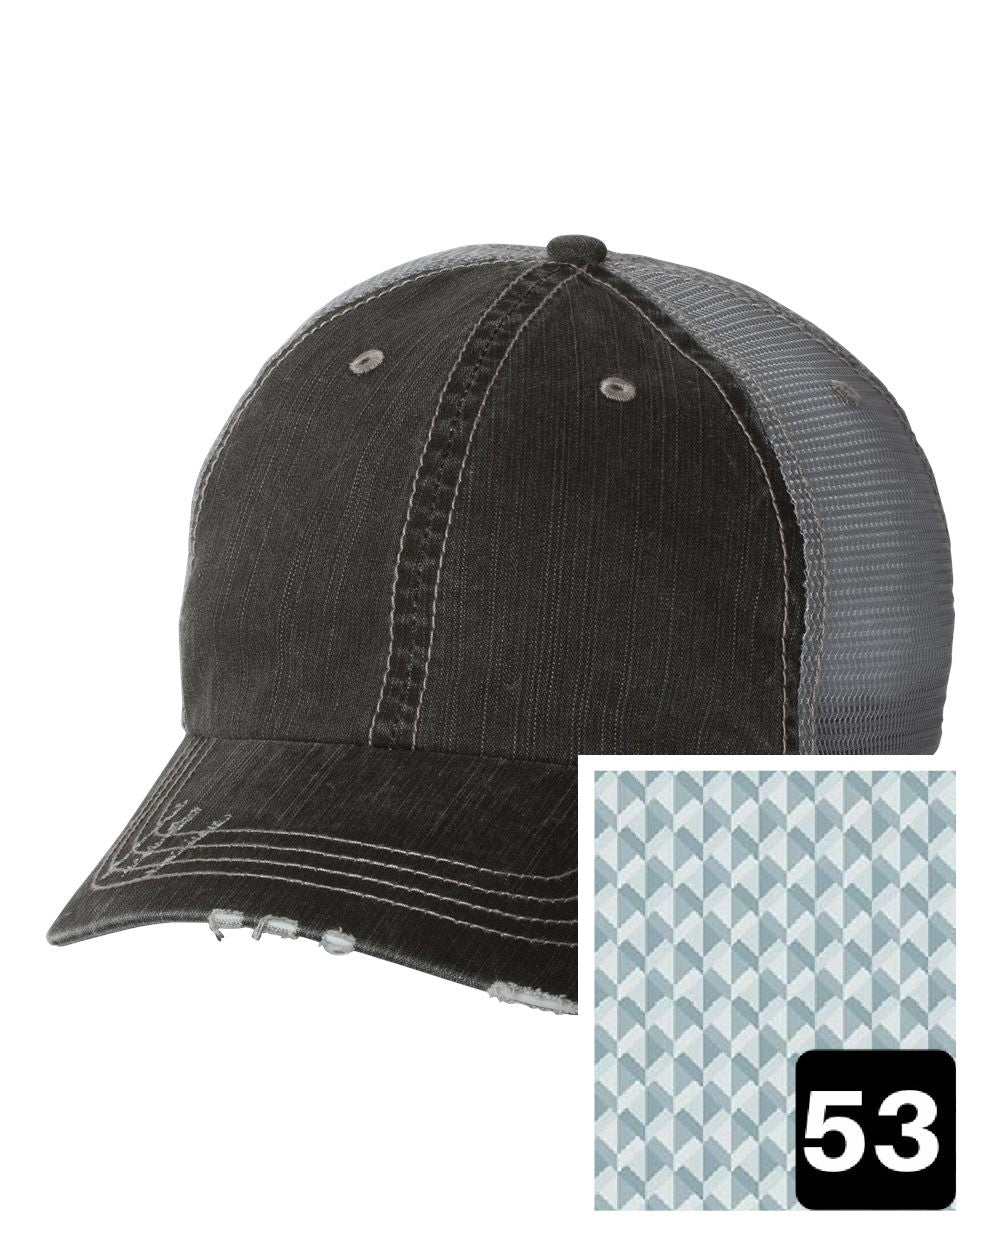 gray distressed trucker hat with multi-color stripe fabric state of South Dakota